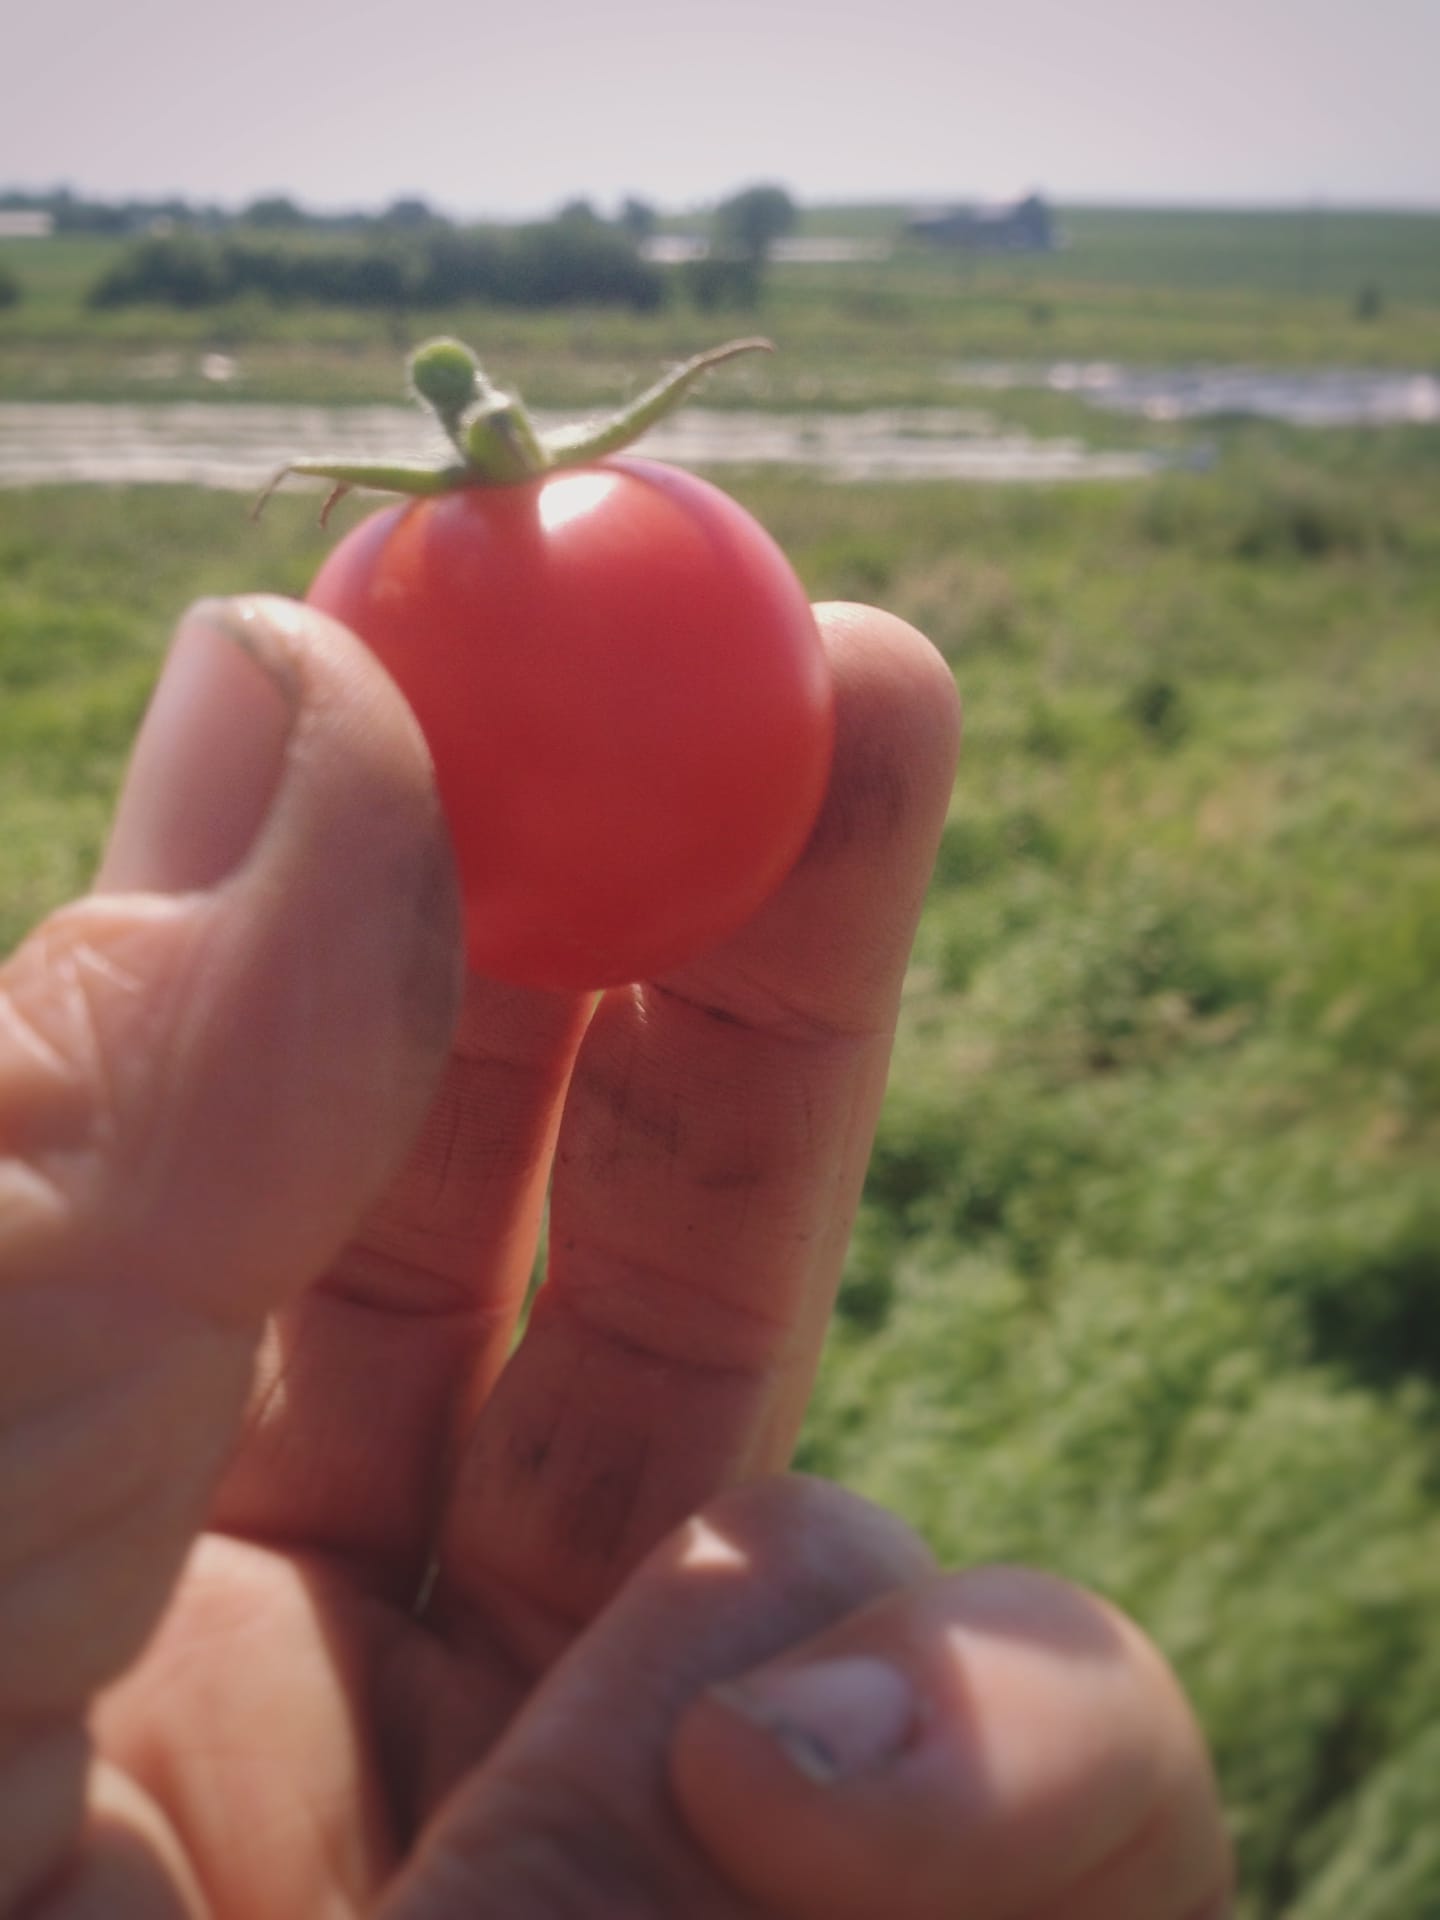 The First Tomato